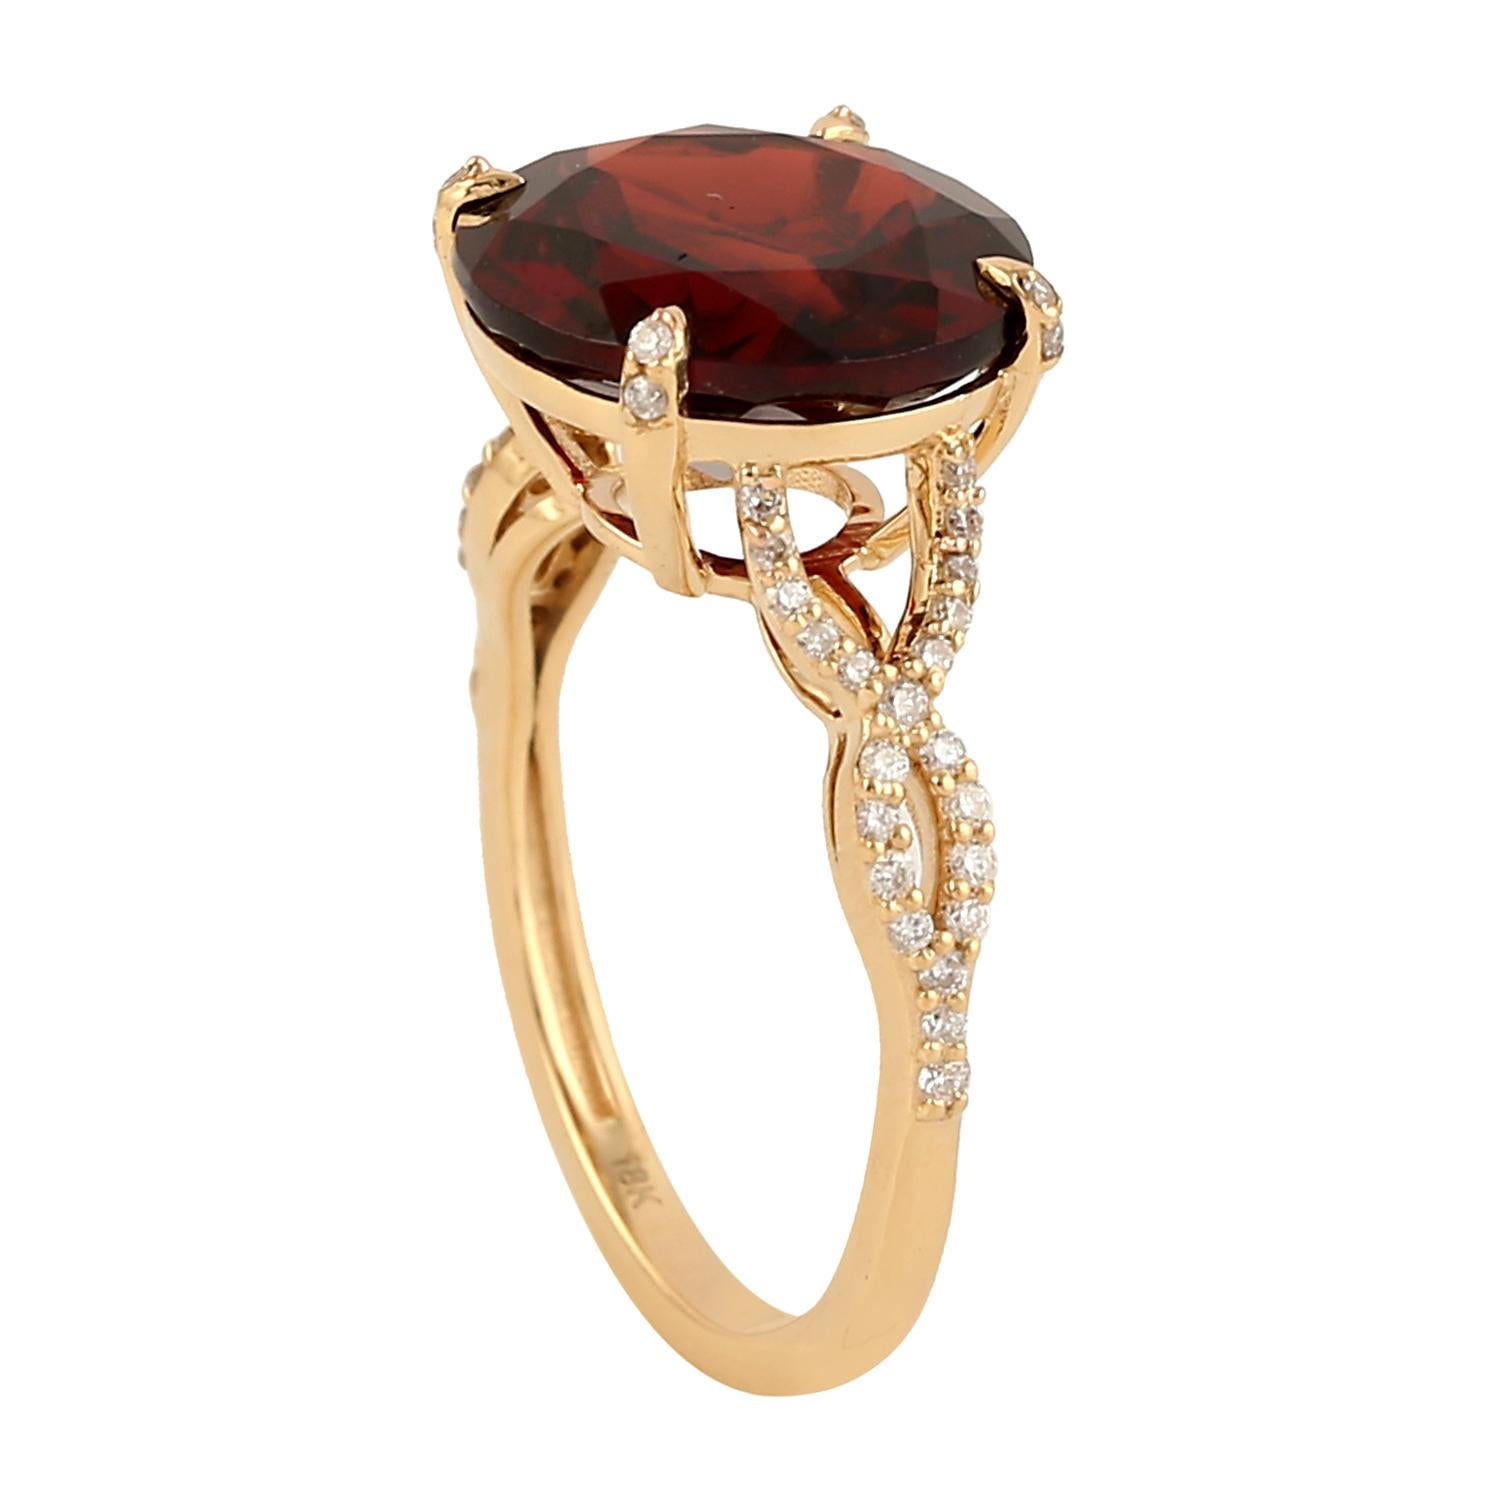 Contemporary 7.44 Ct Garnet Cocktail Ring With Diamonds Made In 18k yellow Gold For Sale